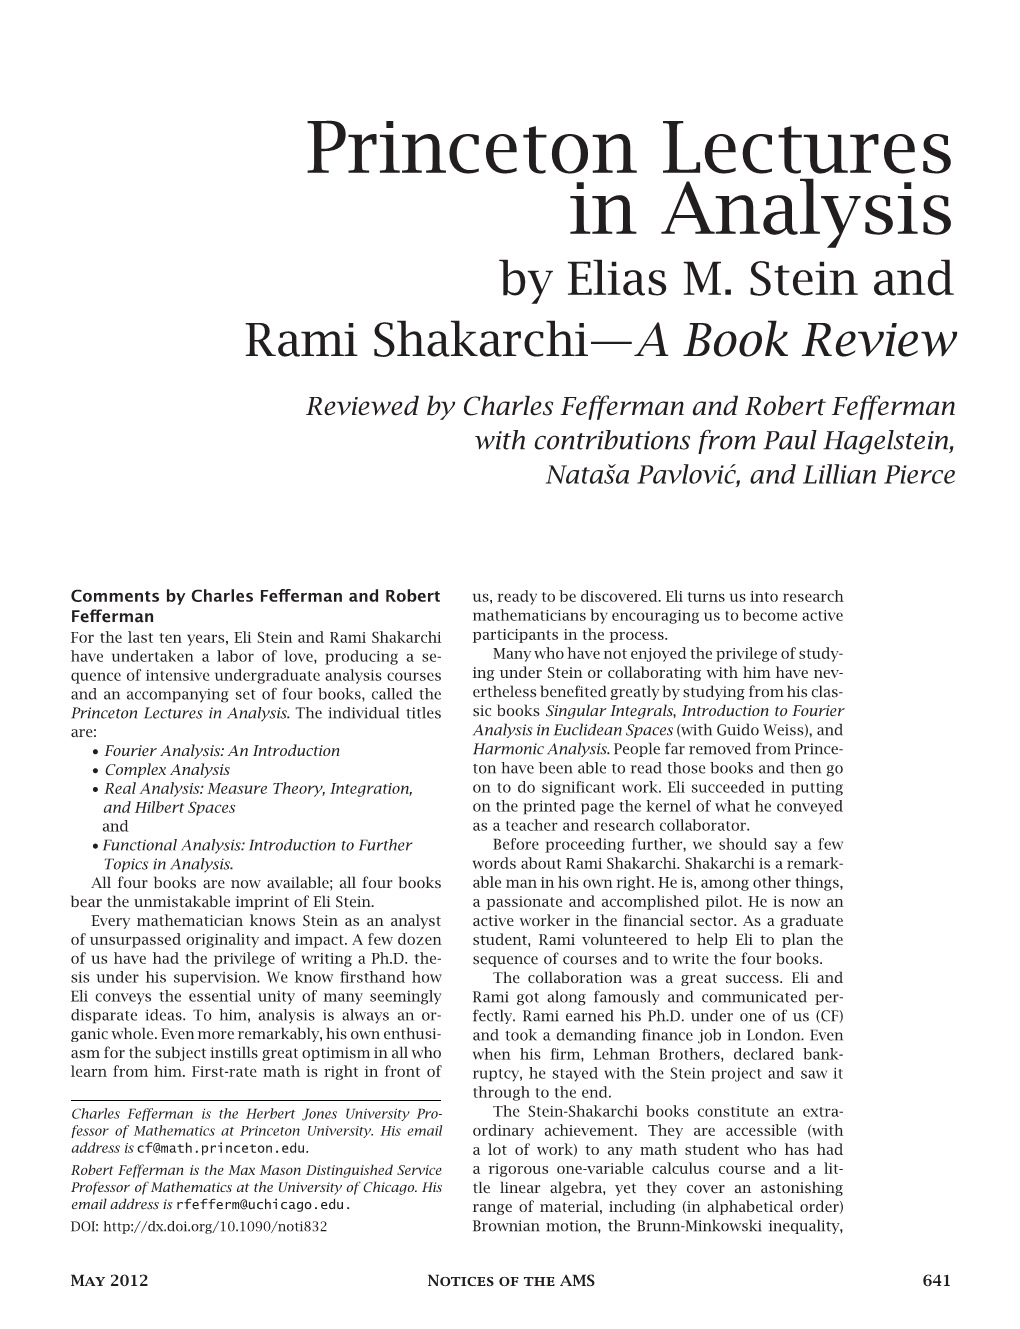 Princeton Lectures in Analysis by Elias M